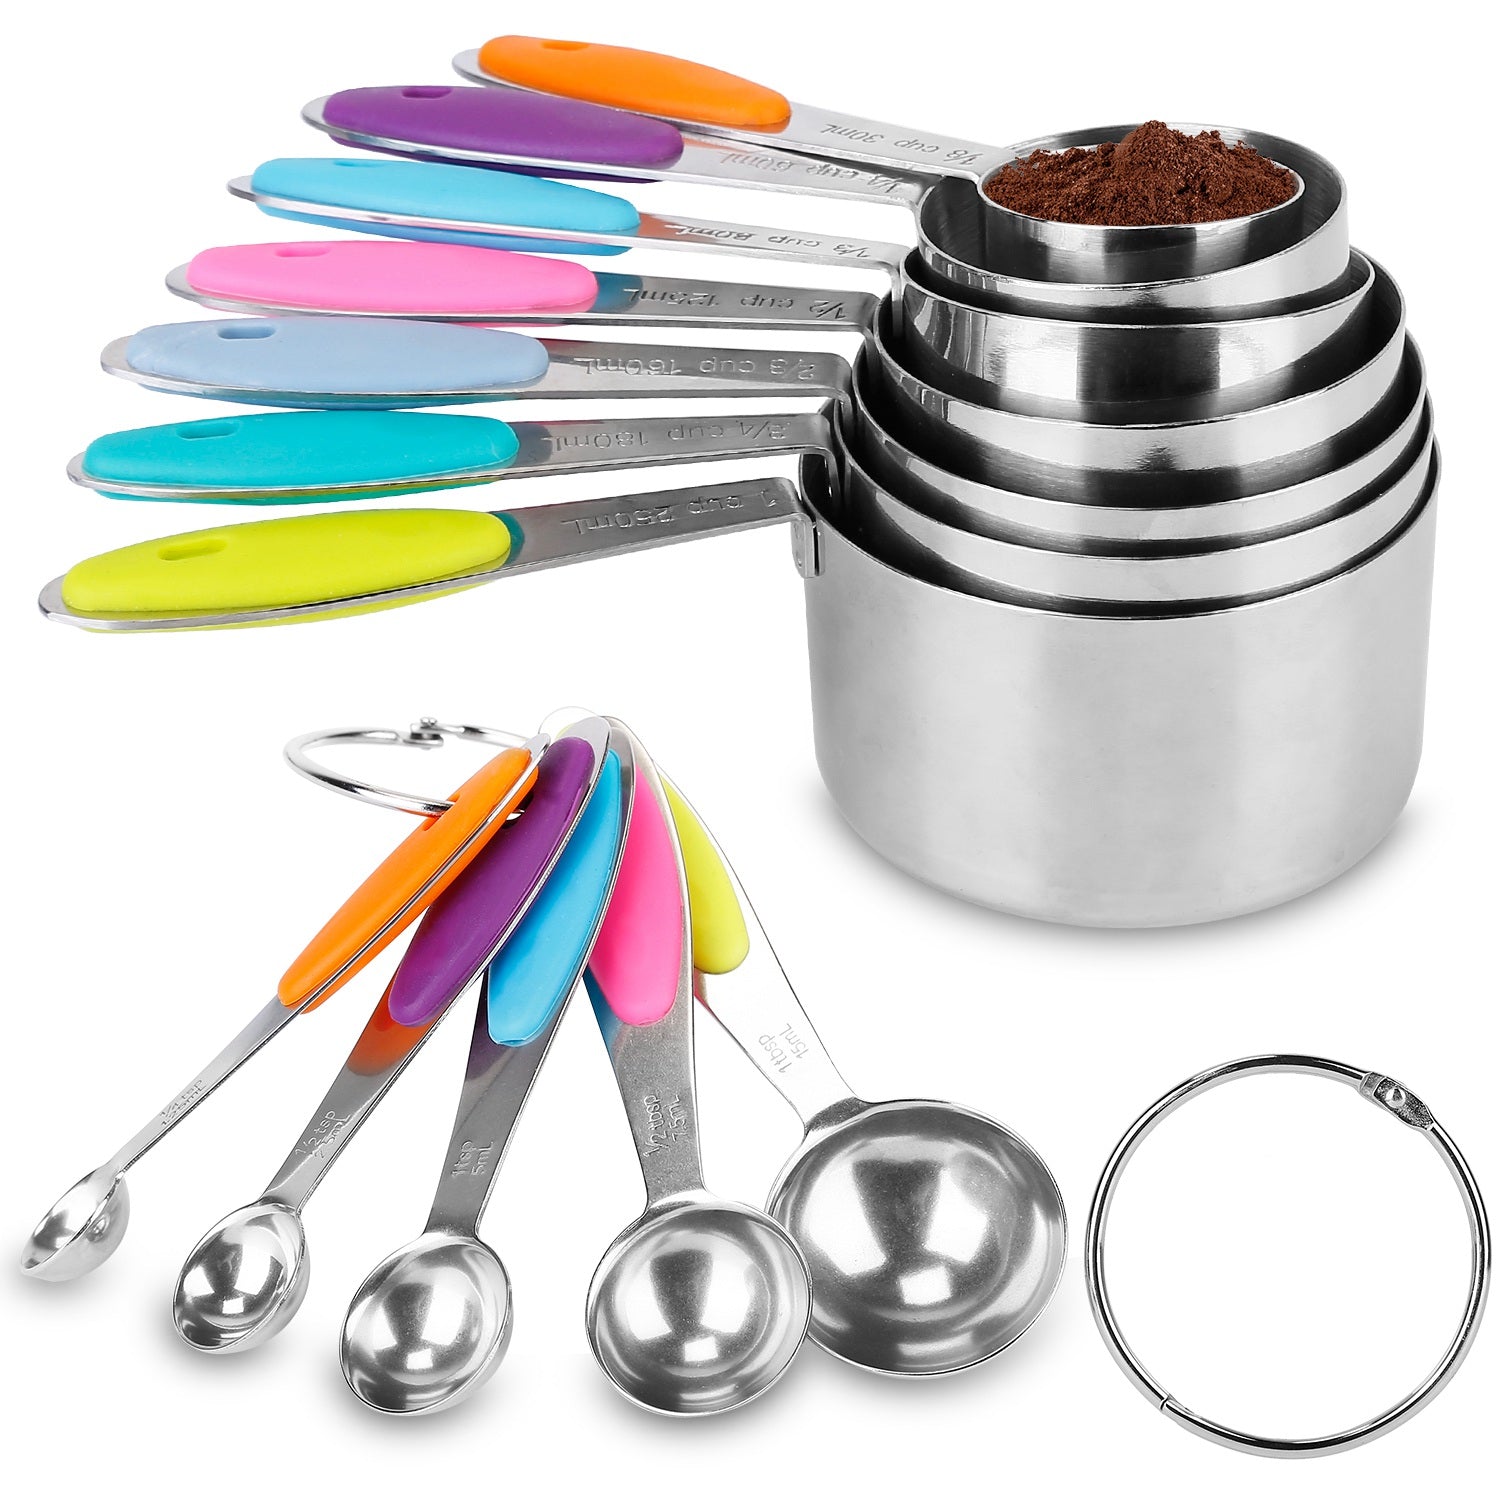 12-Piece: Stainless Steel Measuring Cups Spoons Set